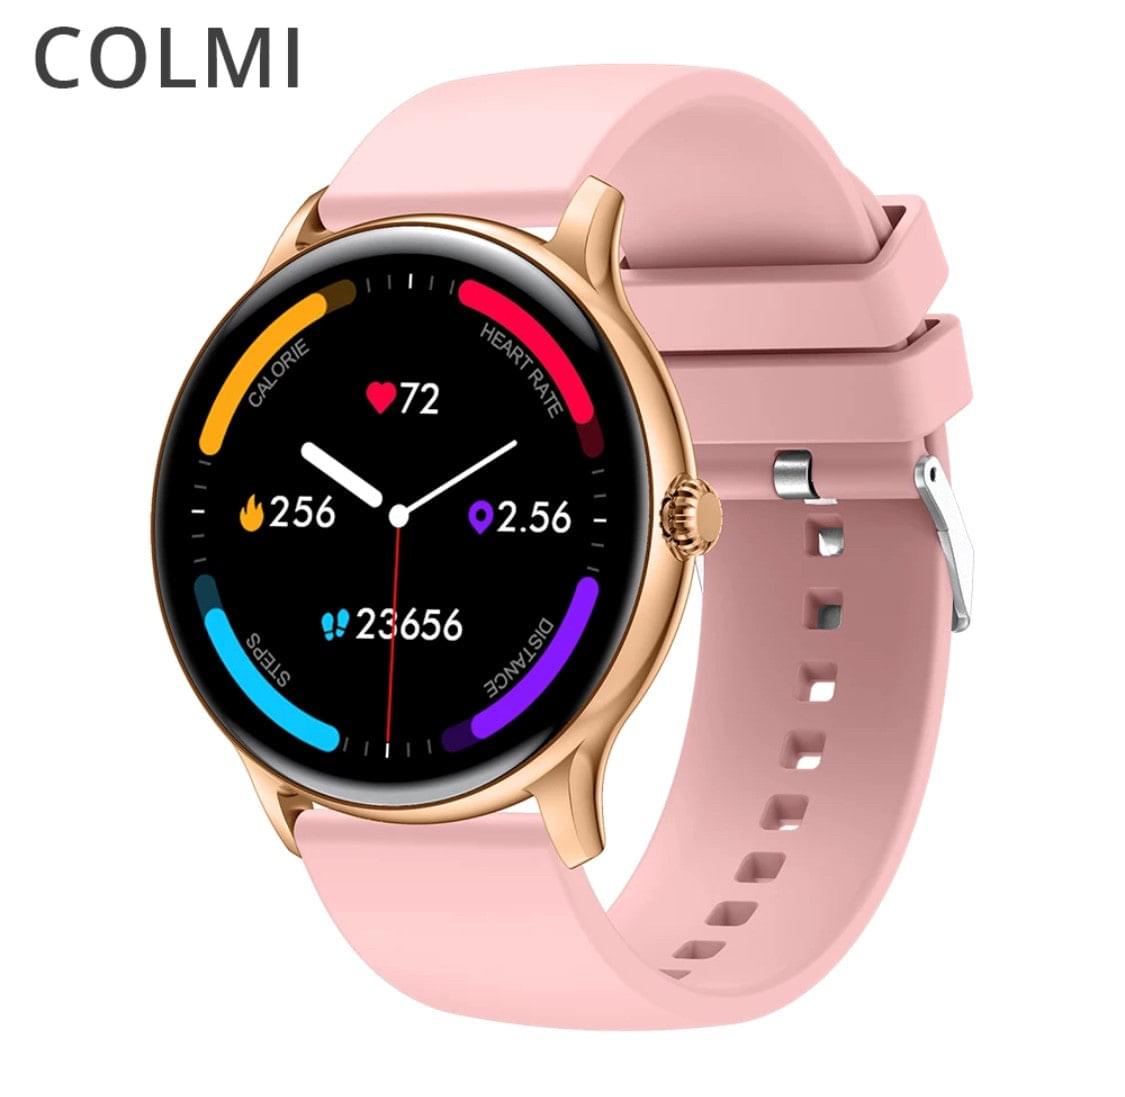 Colmi i10 Silver Smart Watch South Africa